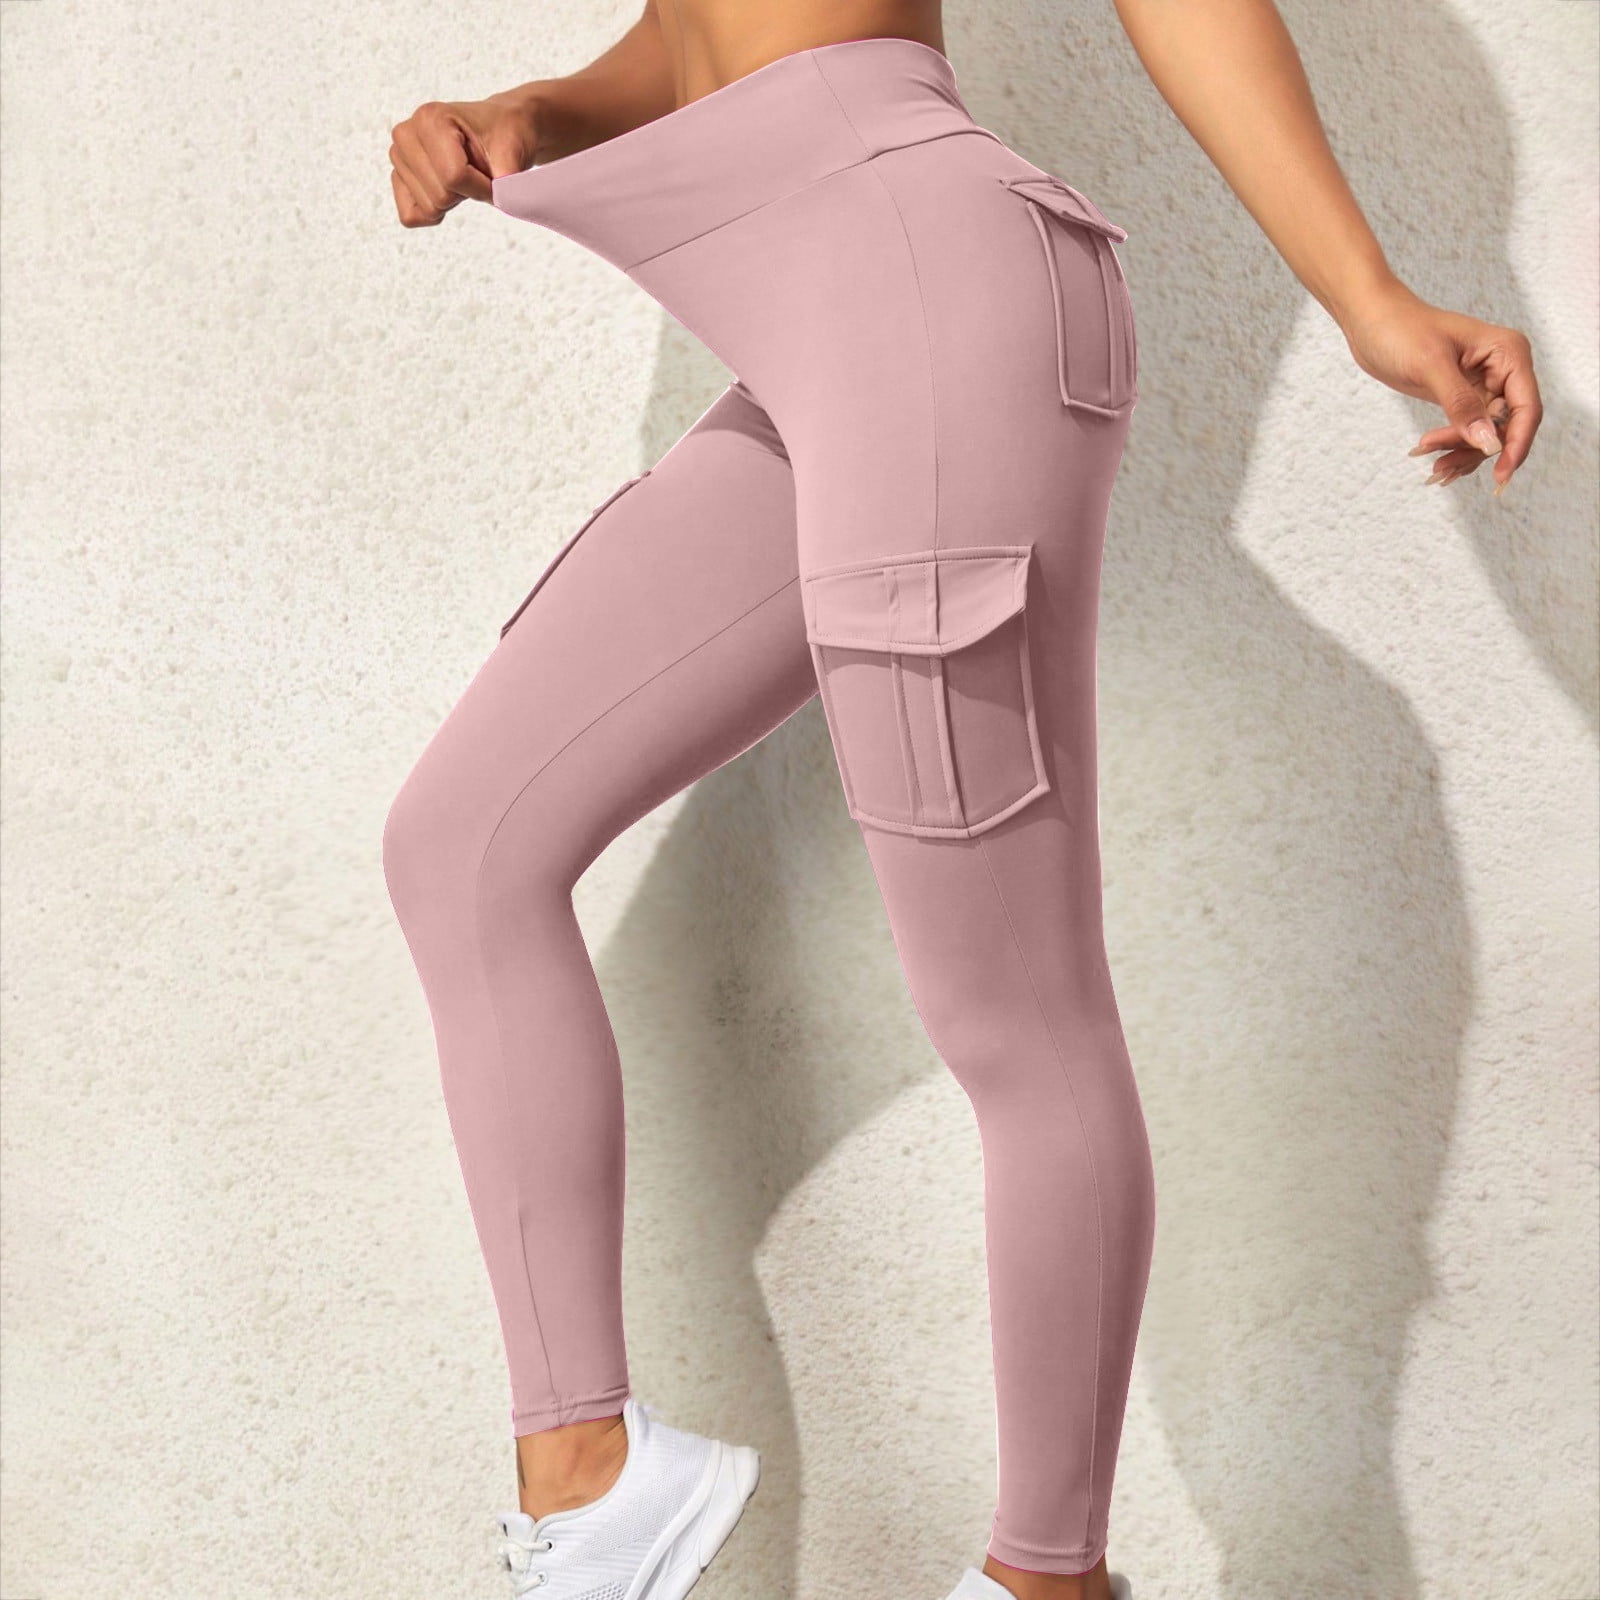 Buttery Soft Leggings For Women - High Waisted Tummy Control No